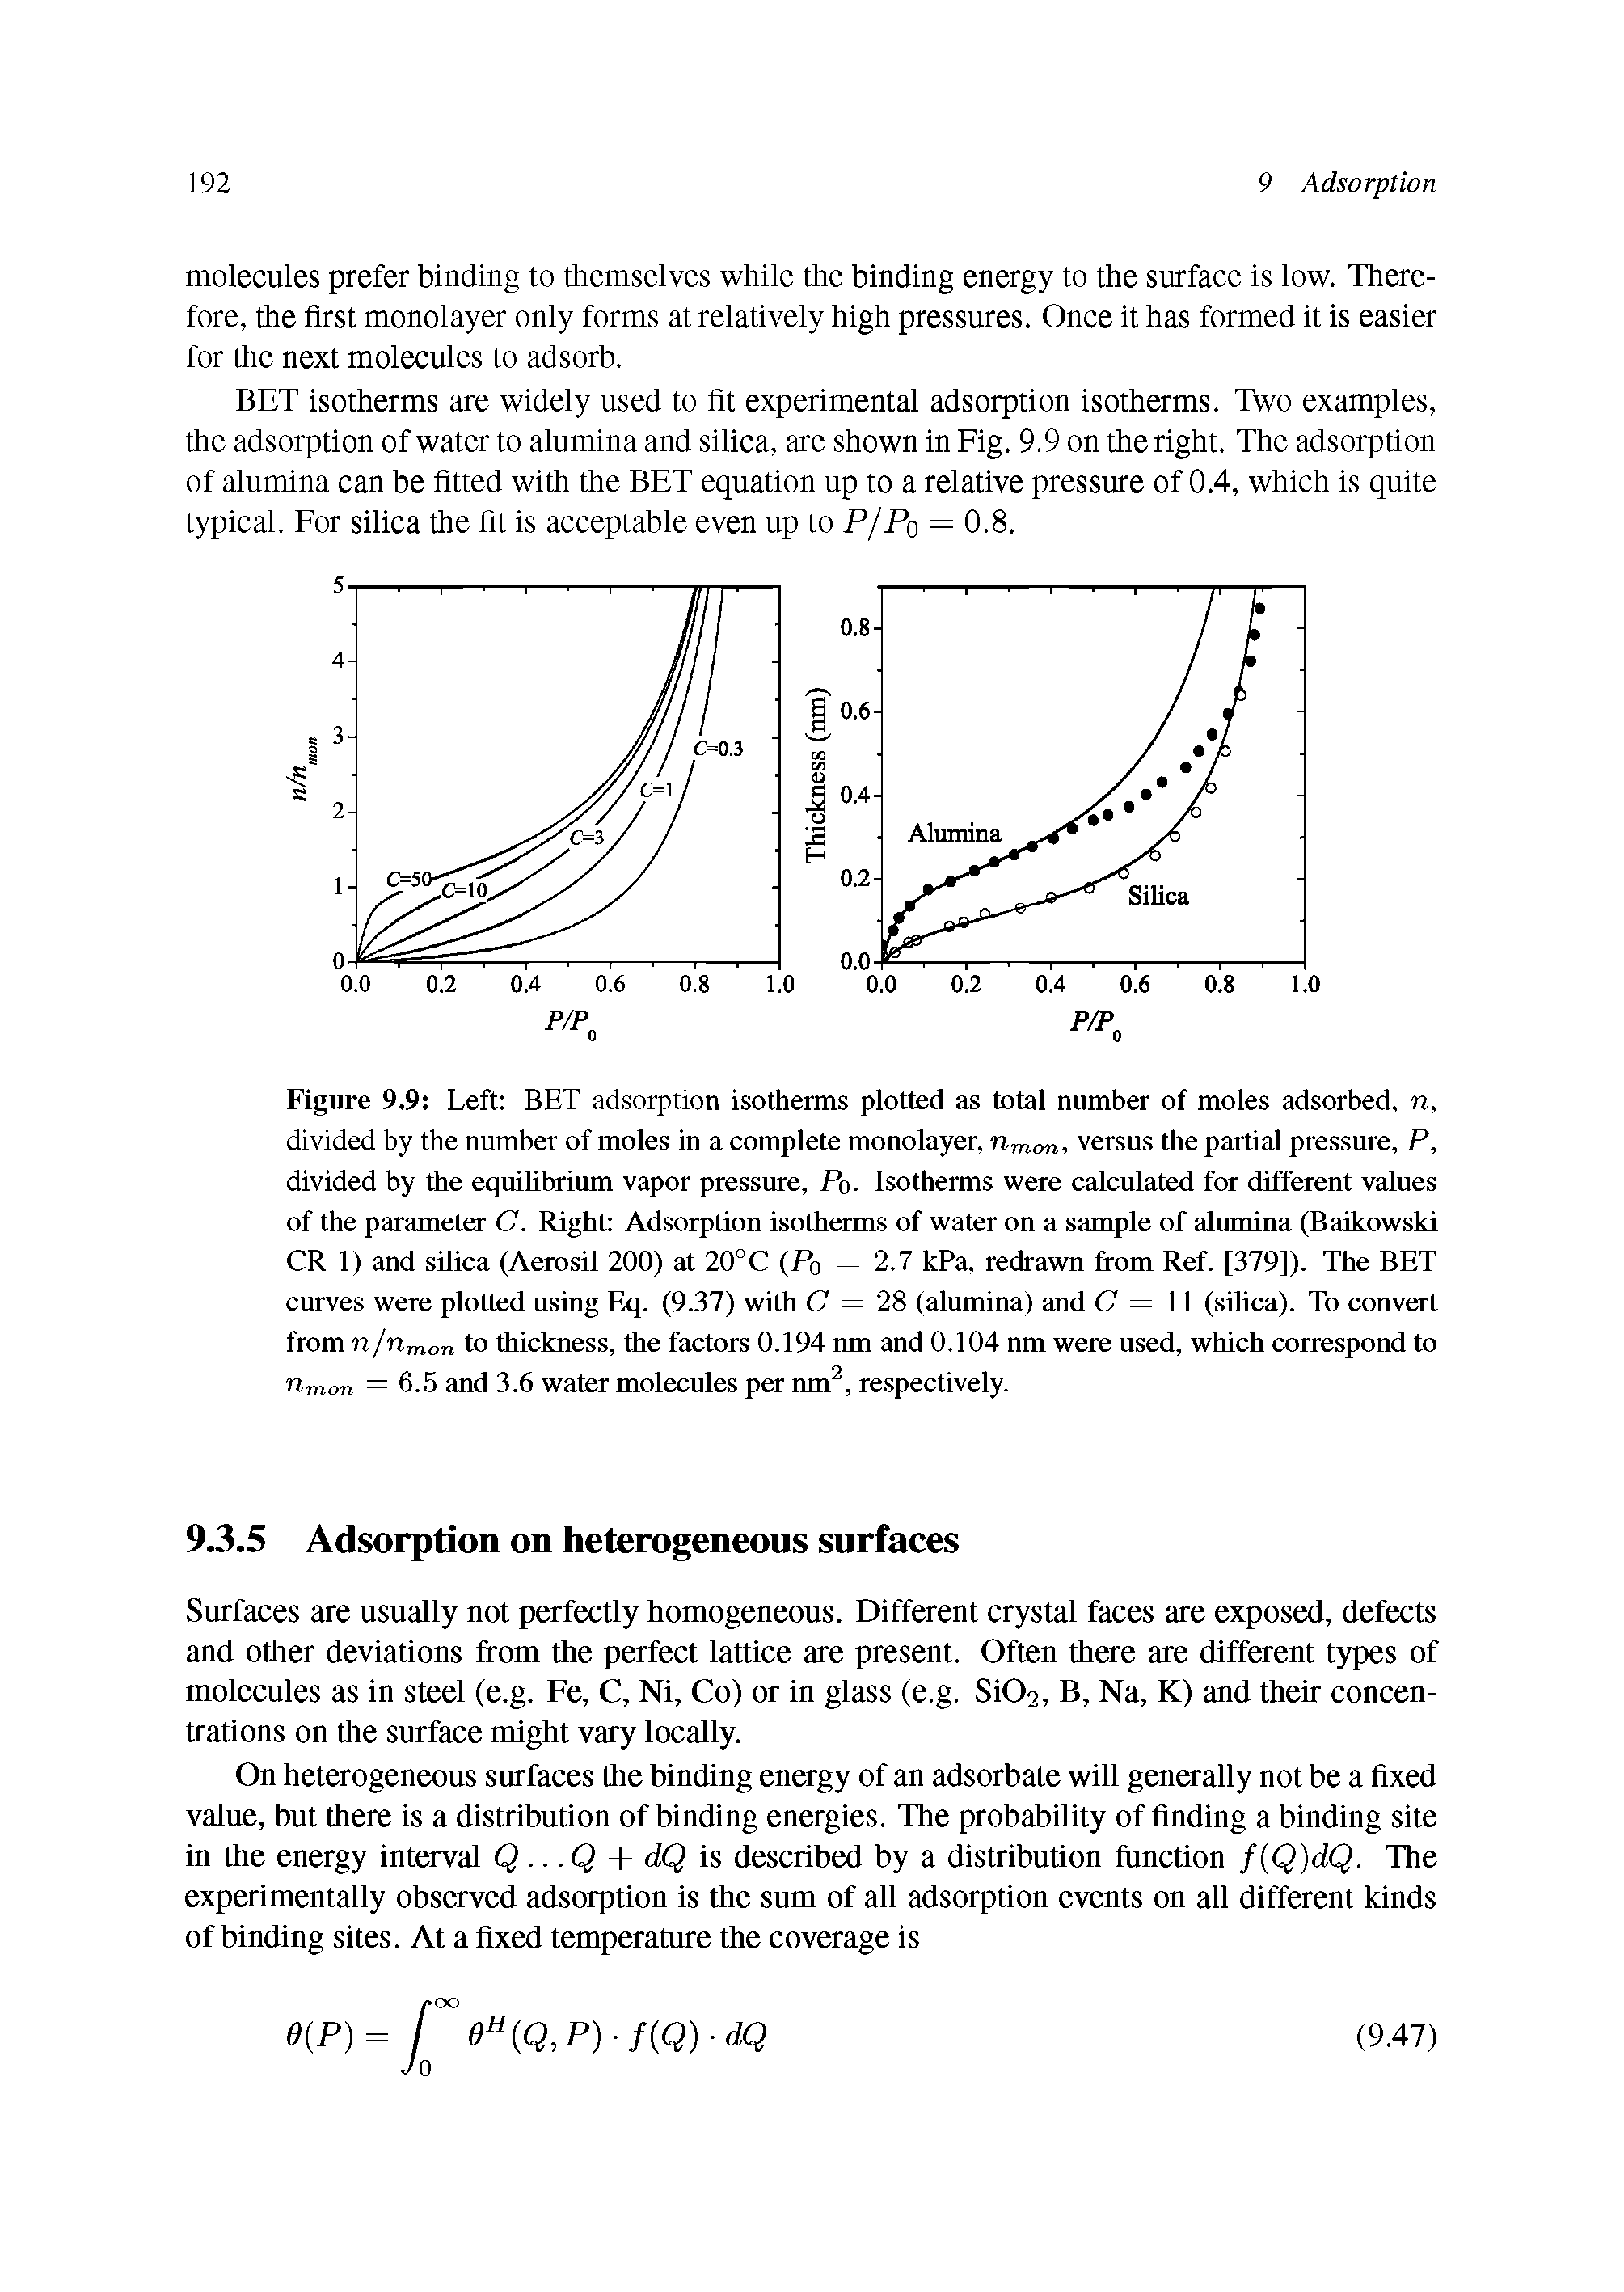 Figure 9.9 Left BET adsorption isotherms plotted as total number of moles adsorbed, n, divided by the number of moles in a complete monolayer, ri7non, versus the partial pressure, P, divided by the equilibrium vapor pressure, Po. Isotherms were calculated for different values of the parameter C. Right Adsorption isotherms of water on a sample of alumina (Baikowski CR 1) and silica (Aerosil 200) at 20°C (P0 = 2.7 kPa, redrawn from Ref. [379]). The BET curves were plotted using Eq. (9.37) with C = 28 (alumina) and C = 11 (silica). To convert from n/nmo to thickness, the factors 0.194 nm and 0.104 nm were used, which correspond to n-mon = 6.5 and 3.6 water molecules per nm2, respectively.